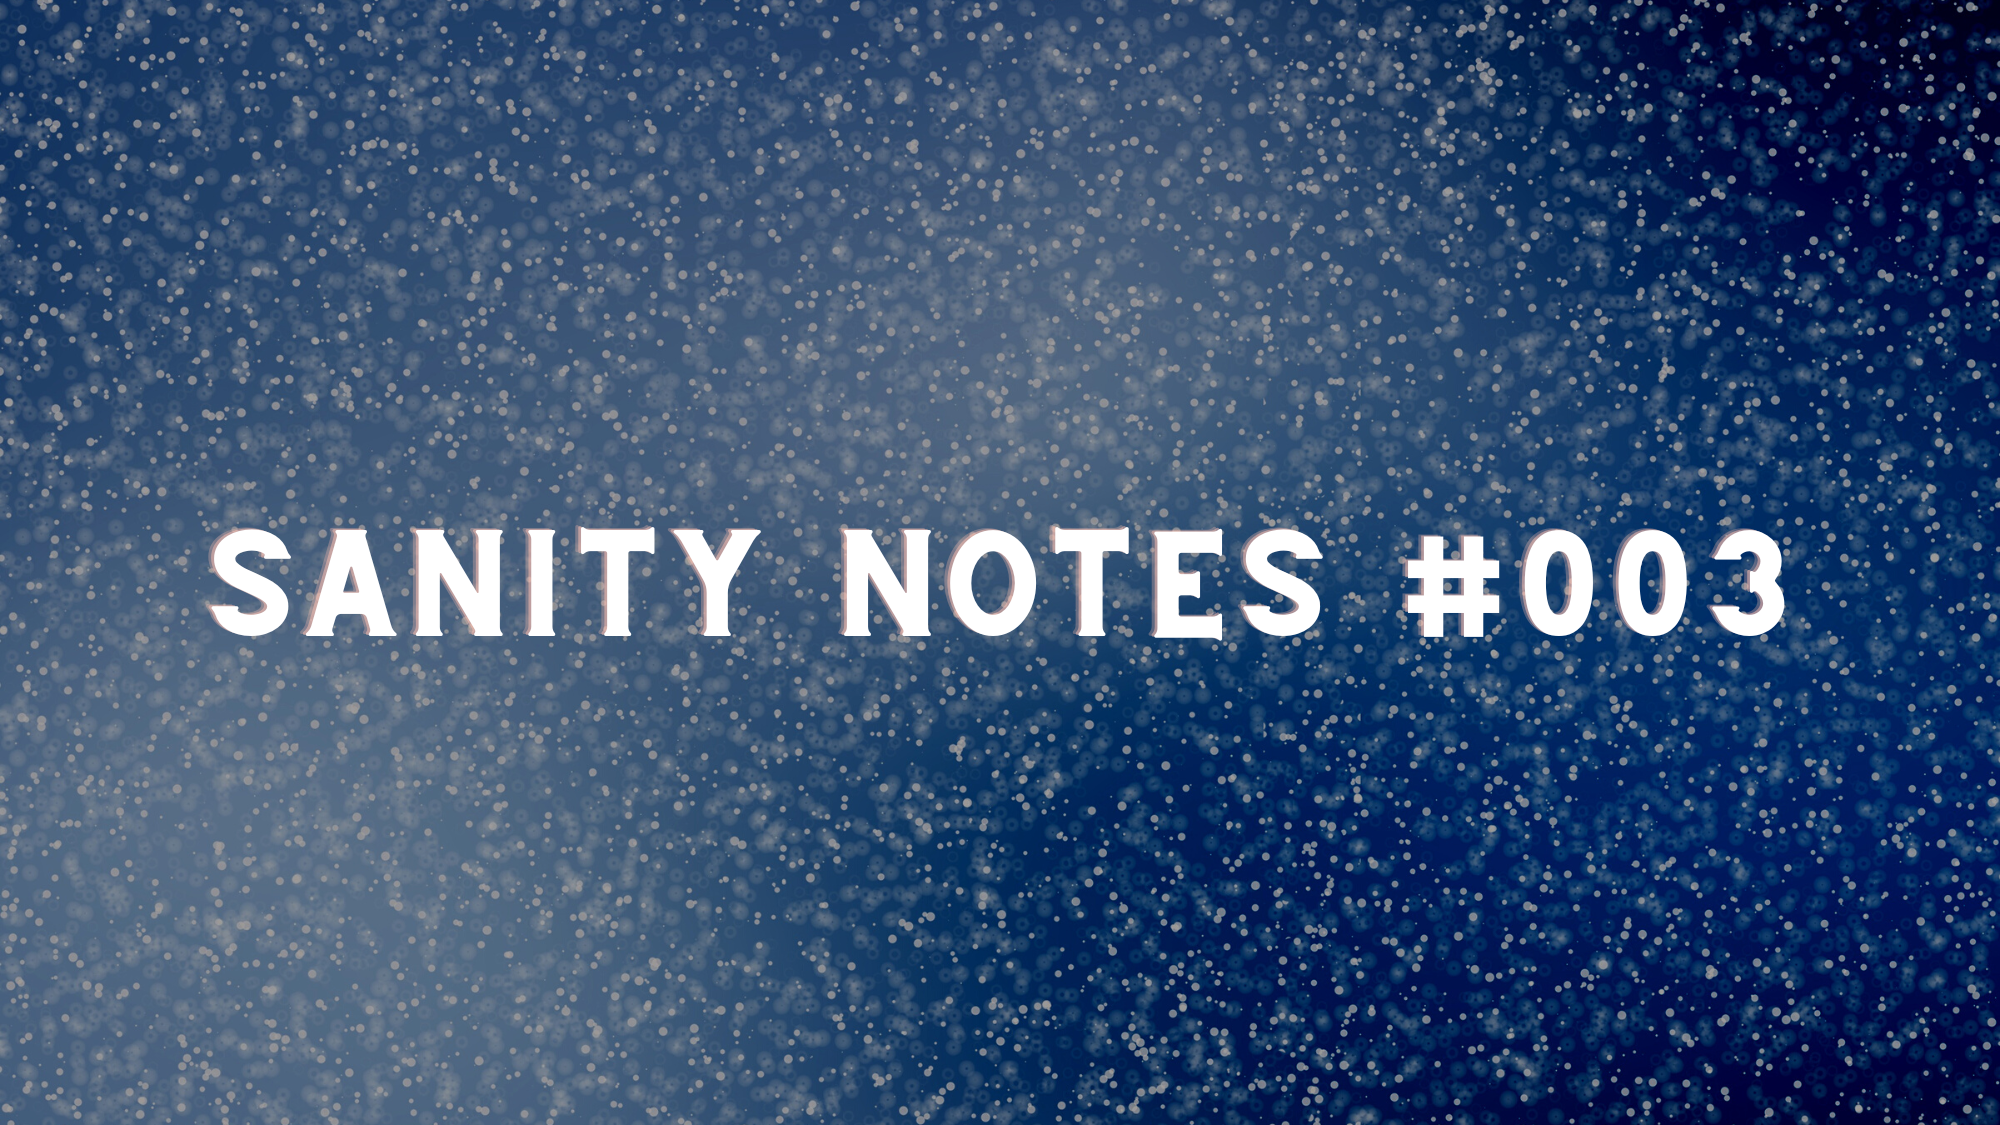 Sanity Notes #003 : Your metrics are not your worth.